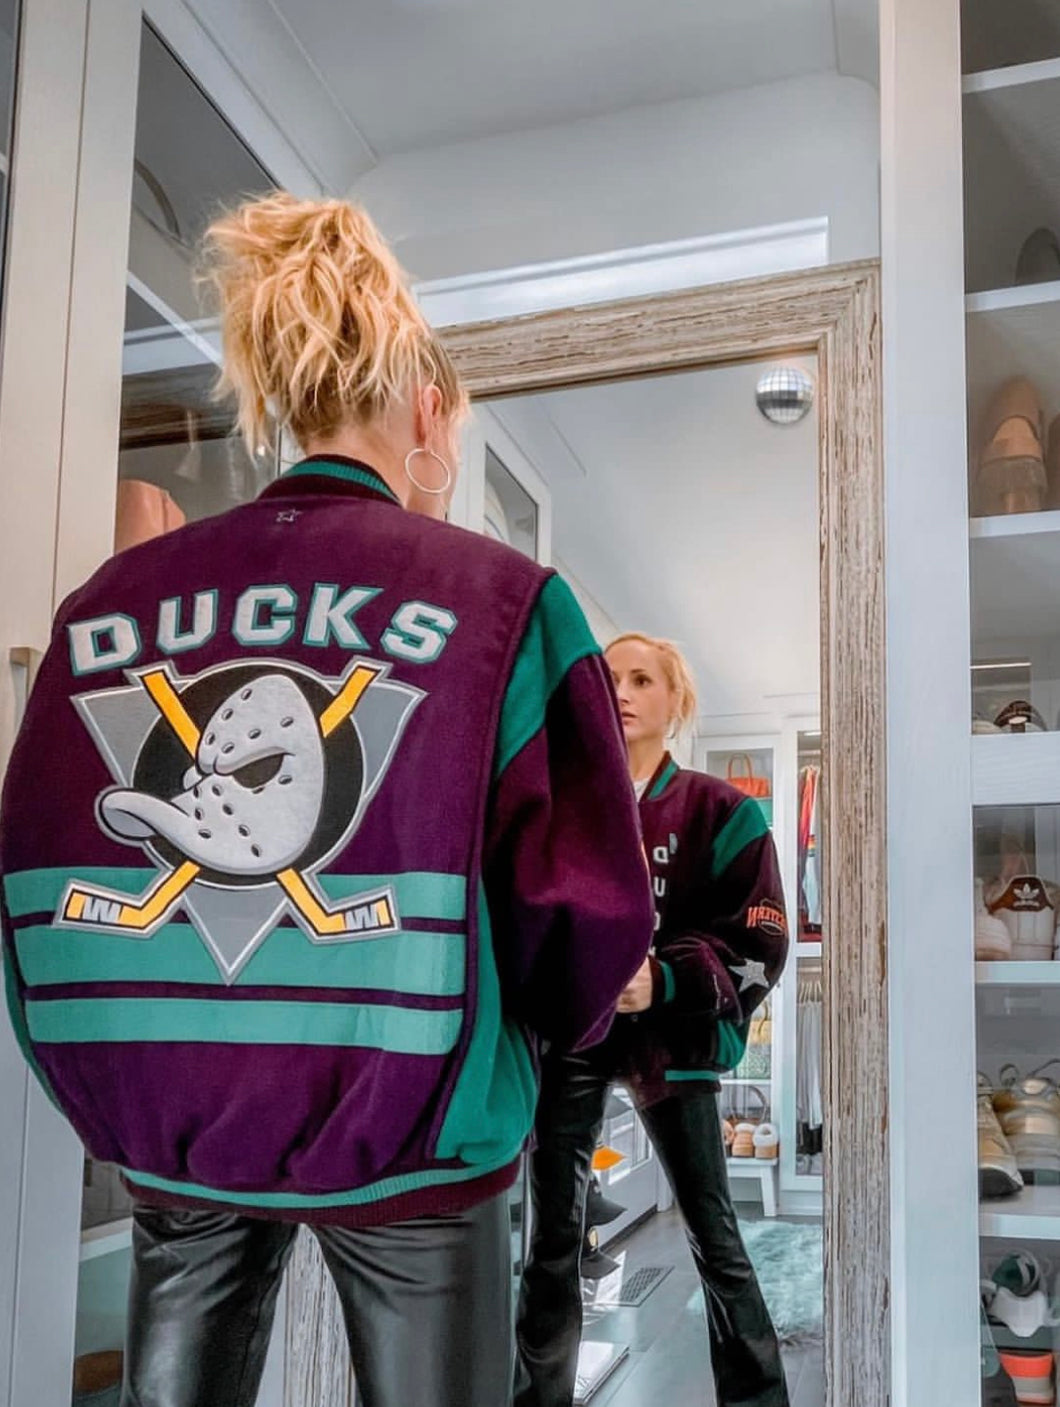 Anaheim Ducks, Mighty Ducks Hockey, “Rare Find” One of a Kind Vintage Letterman Jacket with Crystal Star